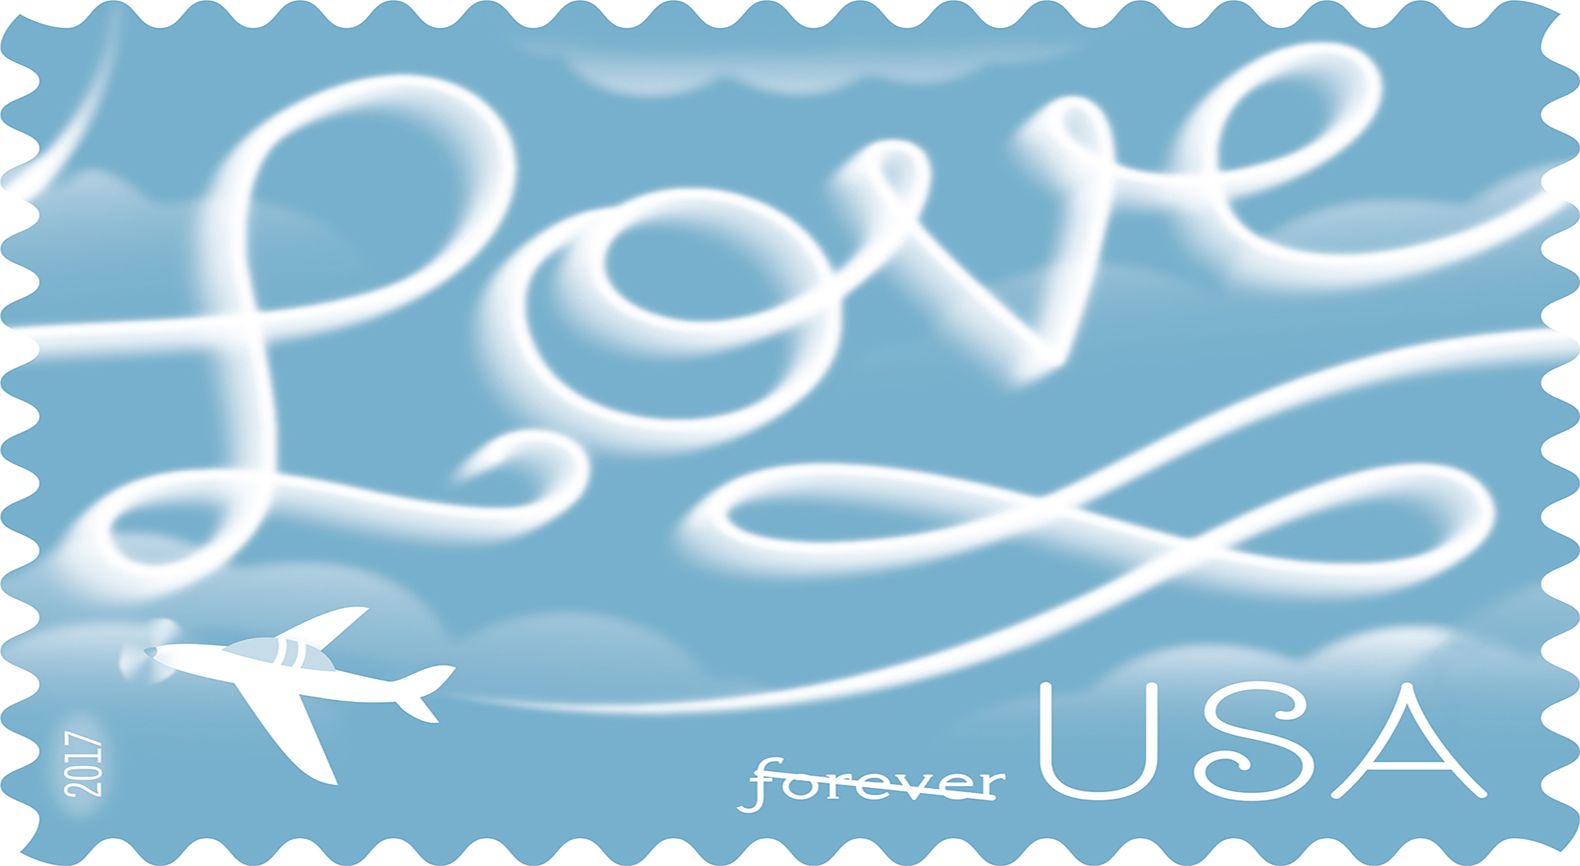 Love Is in the Mail - U.S. Postal Service Releases Made of Hearts Stamp -  Newsroom 